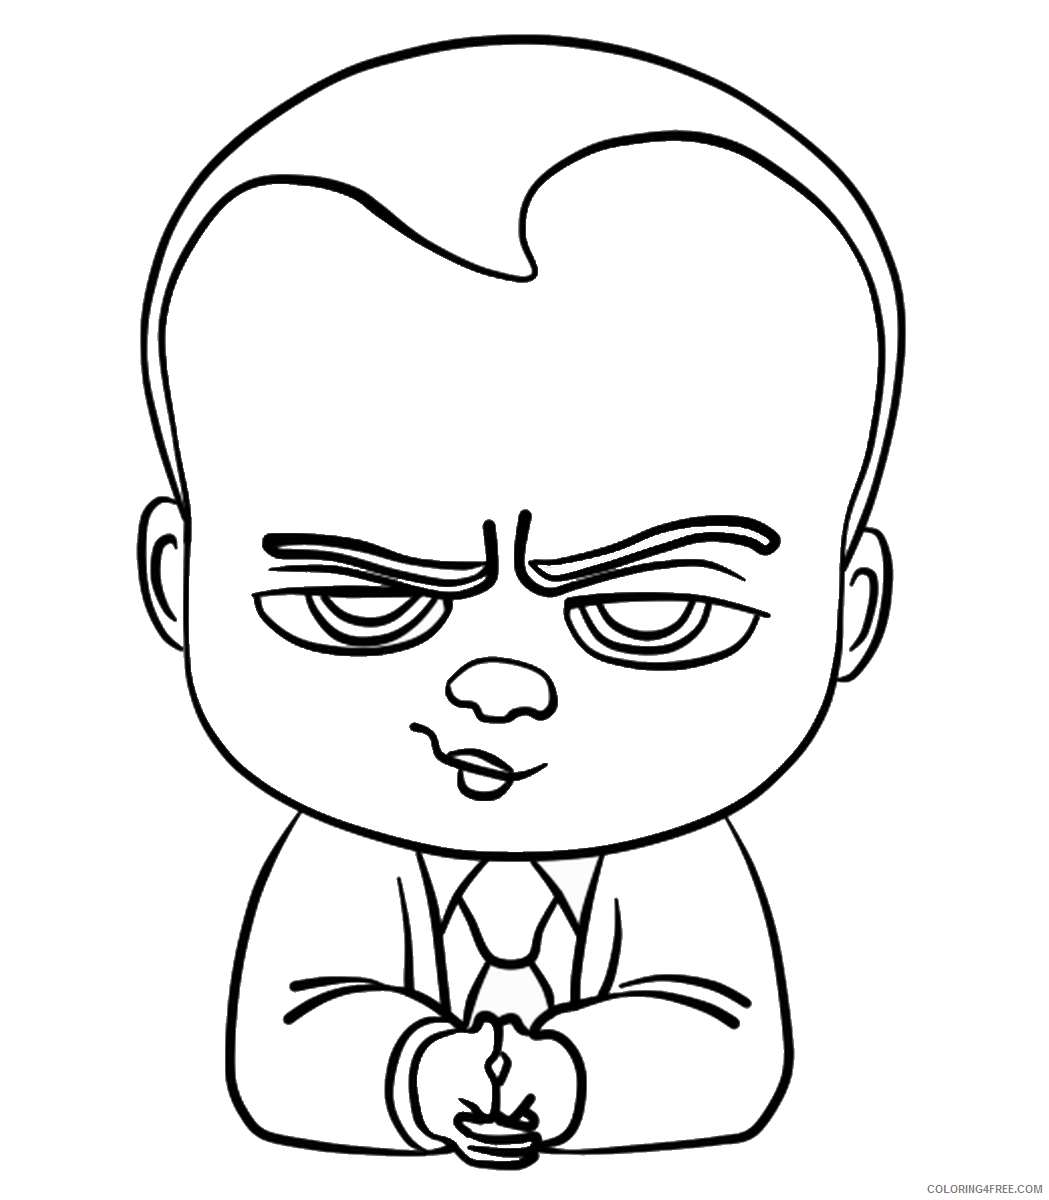 Boss Baby Coloring Pages TV Film the boss baby5 Printable 2020 01284 Coloring4free